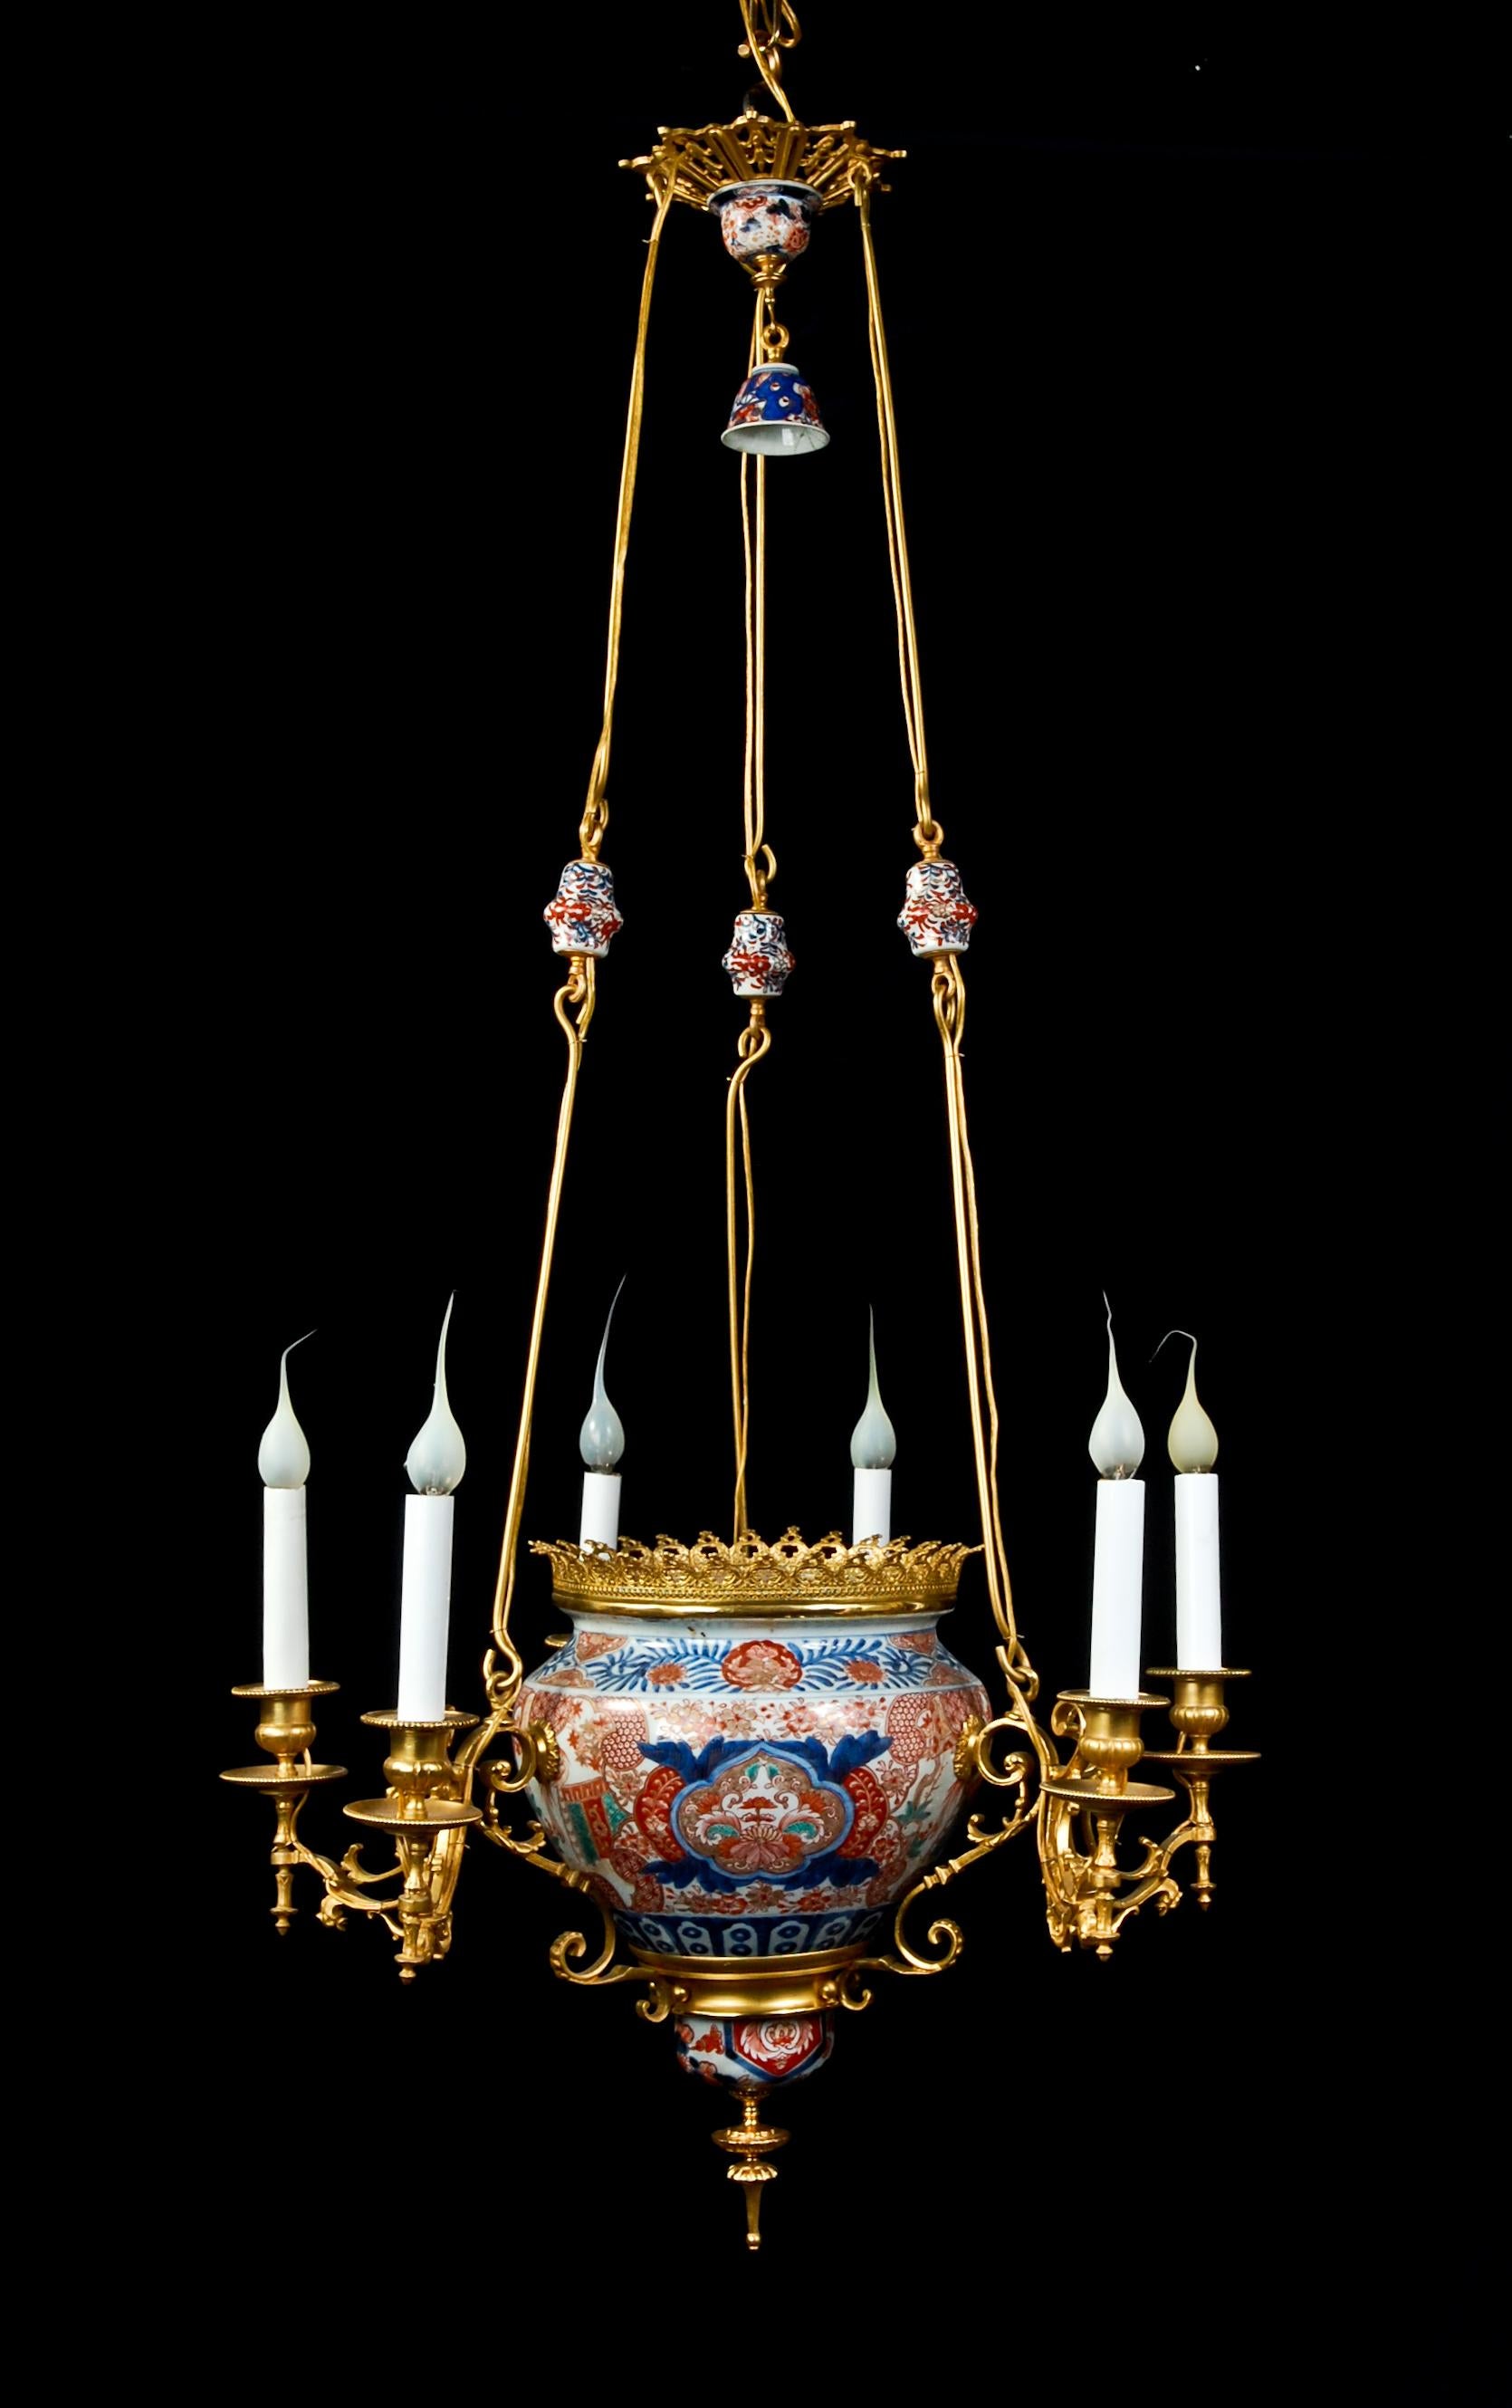 A unique antique French chinoiserie style gilt bronze-mounted Chinese porcelain chandelier embellished with a central hand-painted Chinese porcelain bowl and adorned with fine gilt bronze arms.